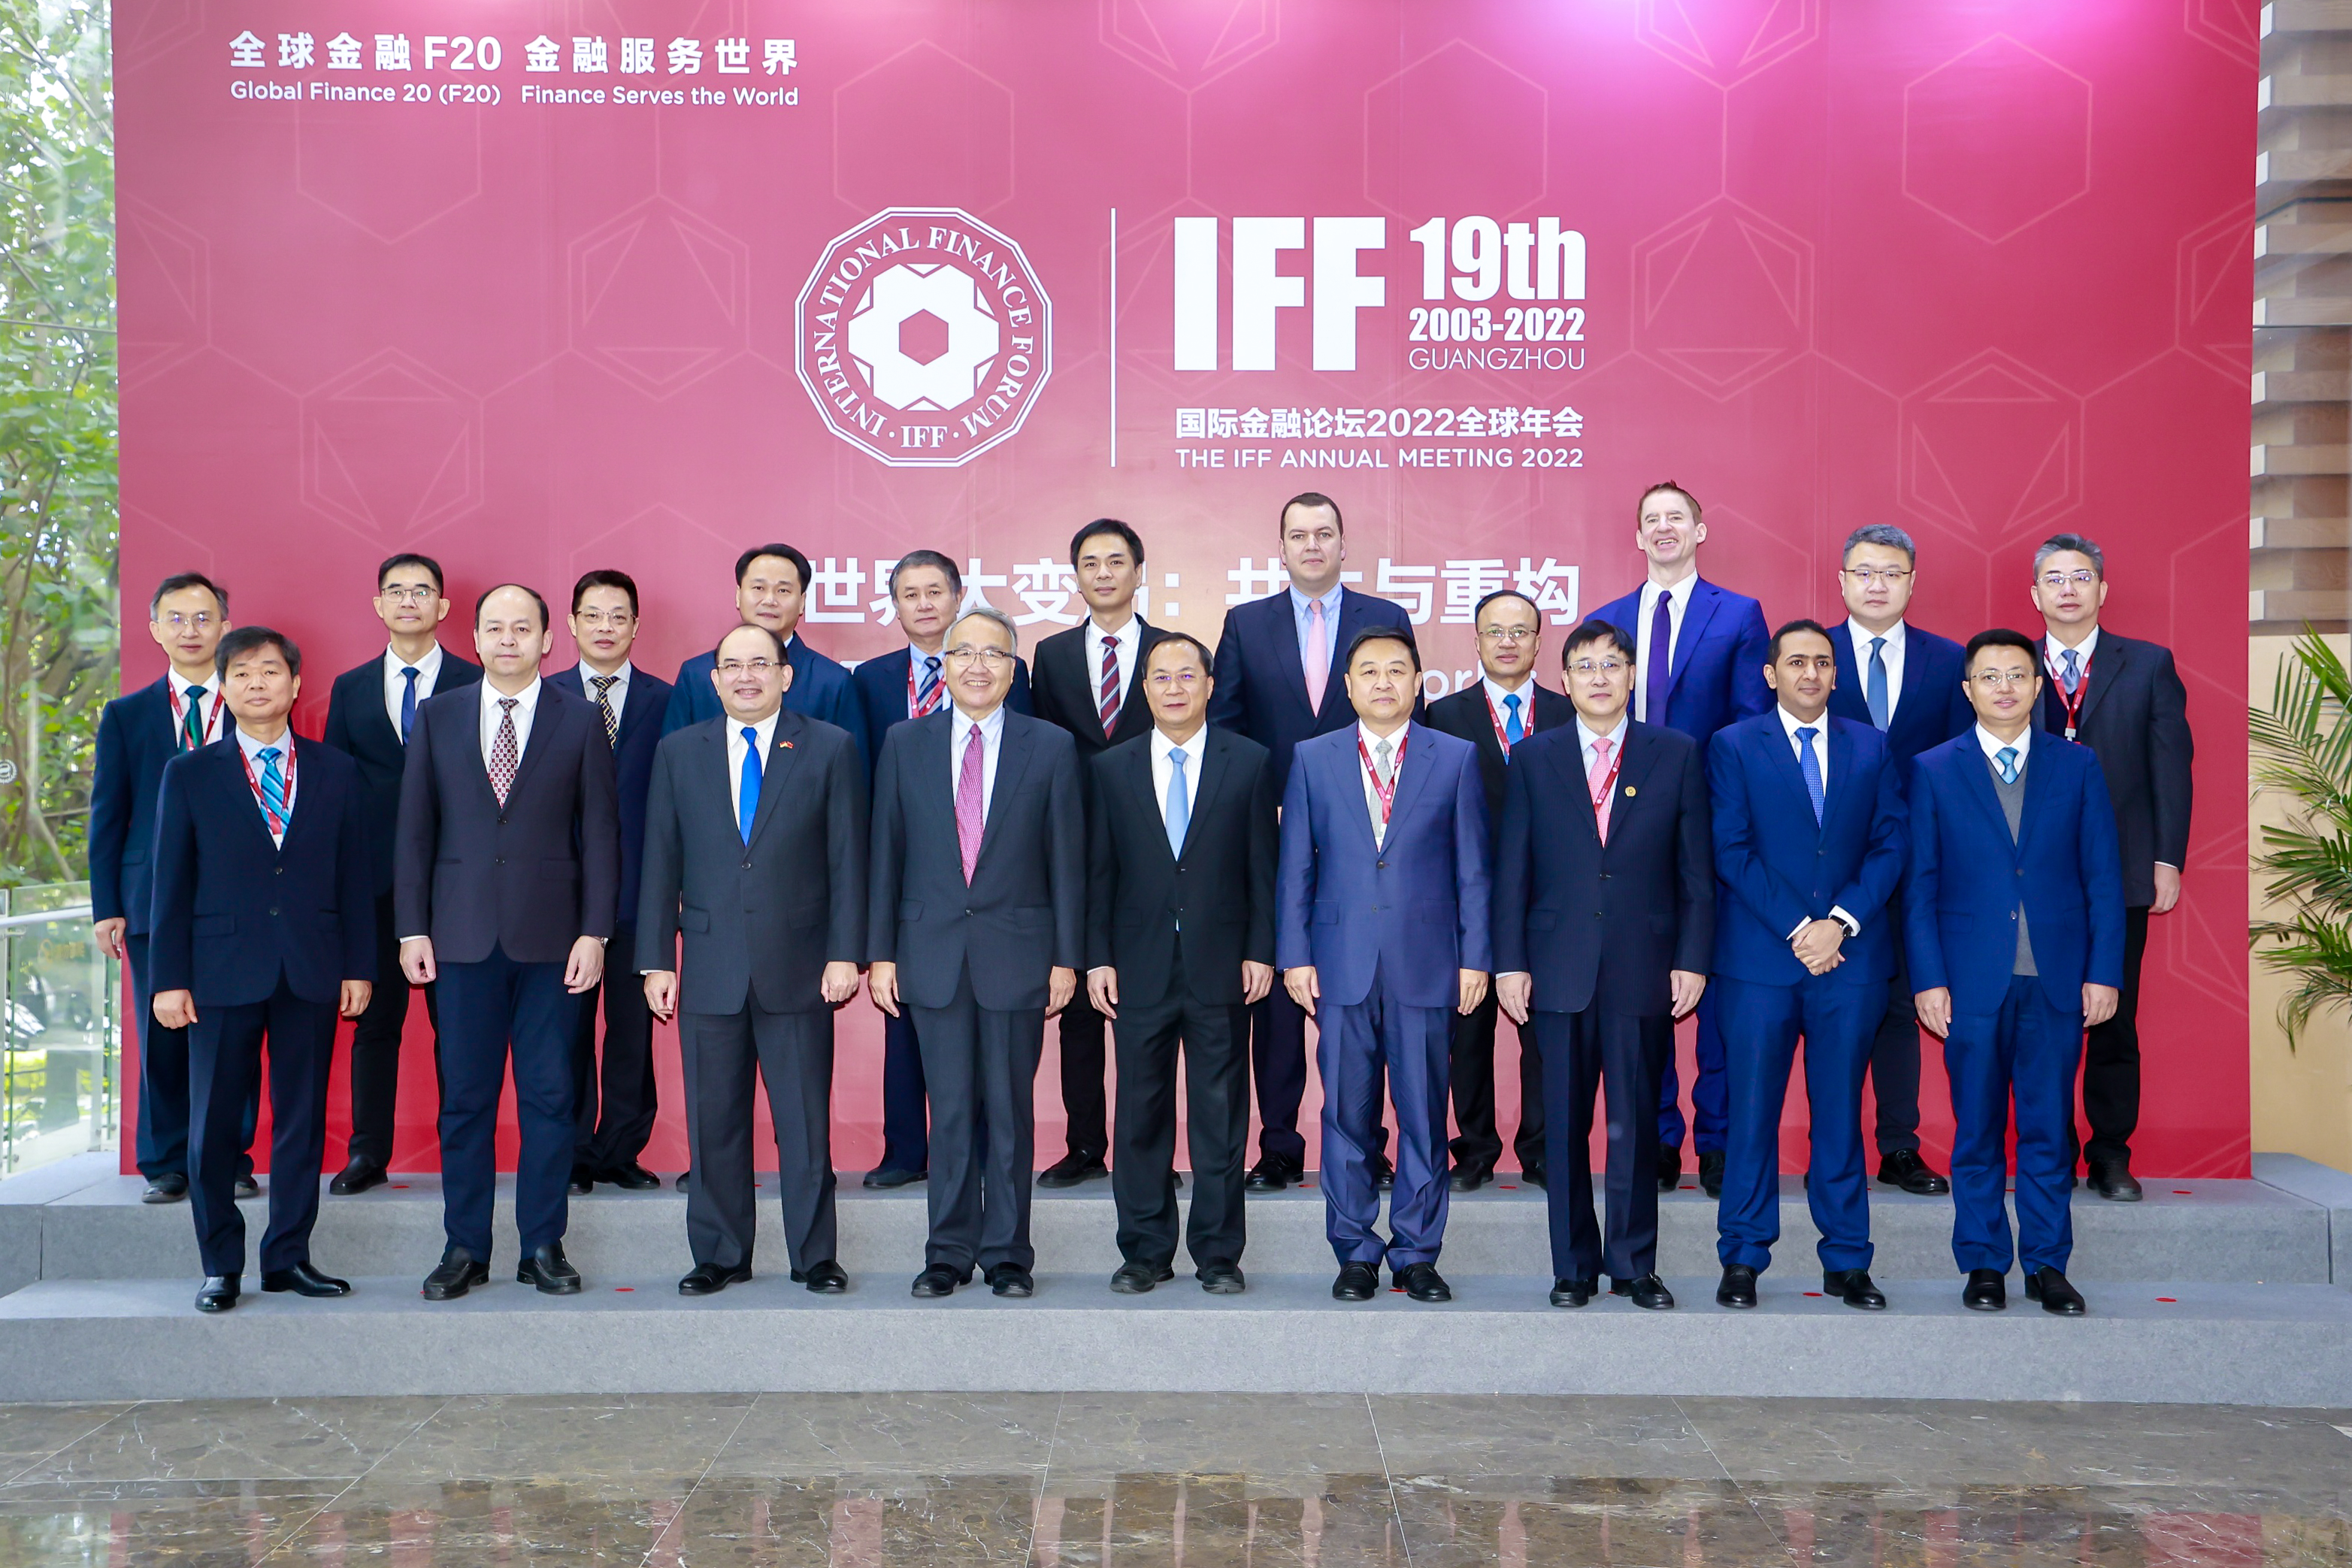 Distinguished guests at IFF 2022 Annual Meeting